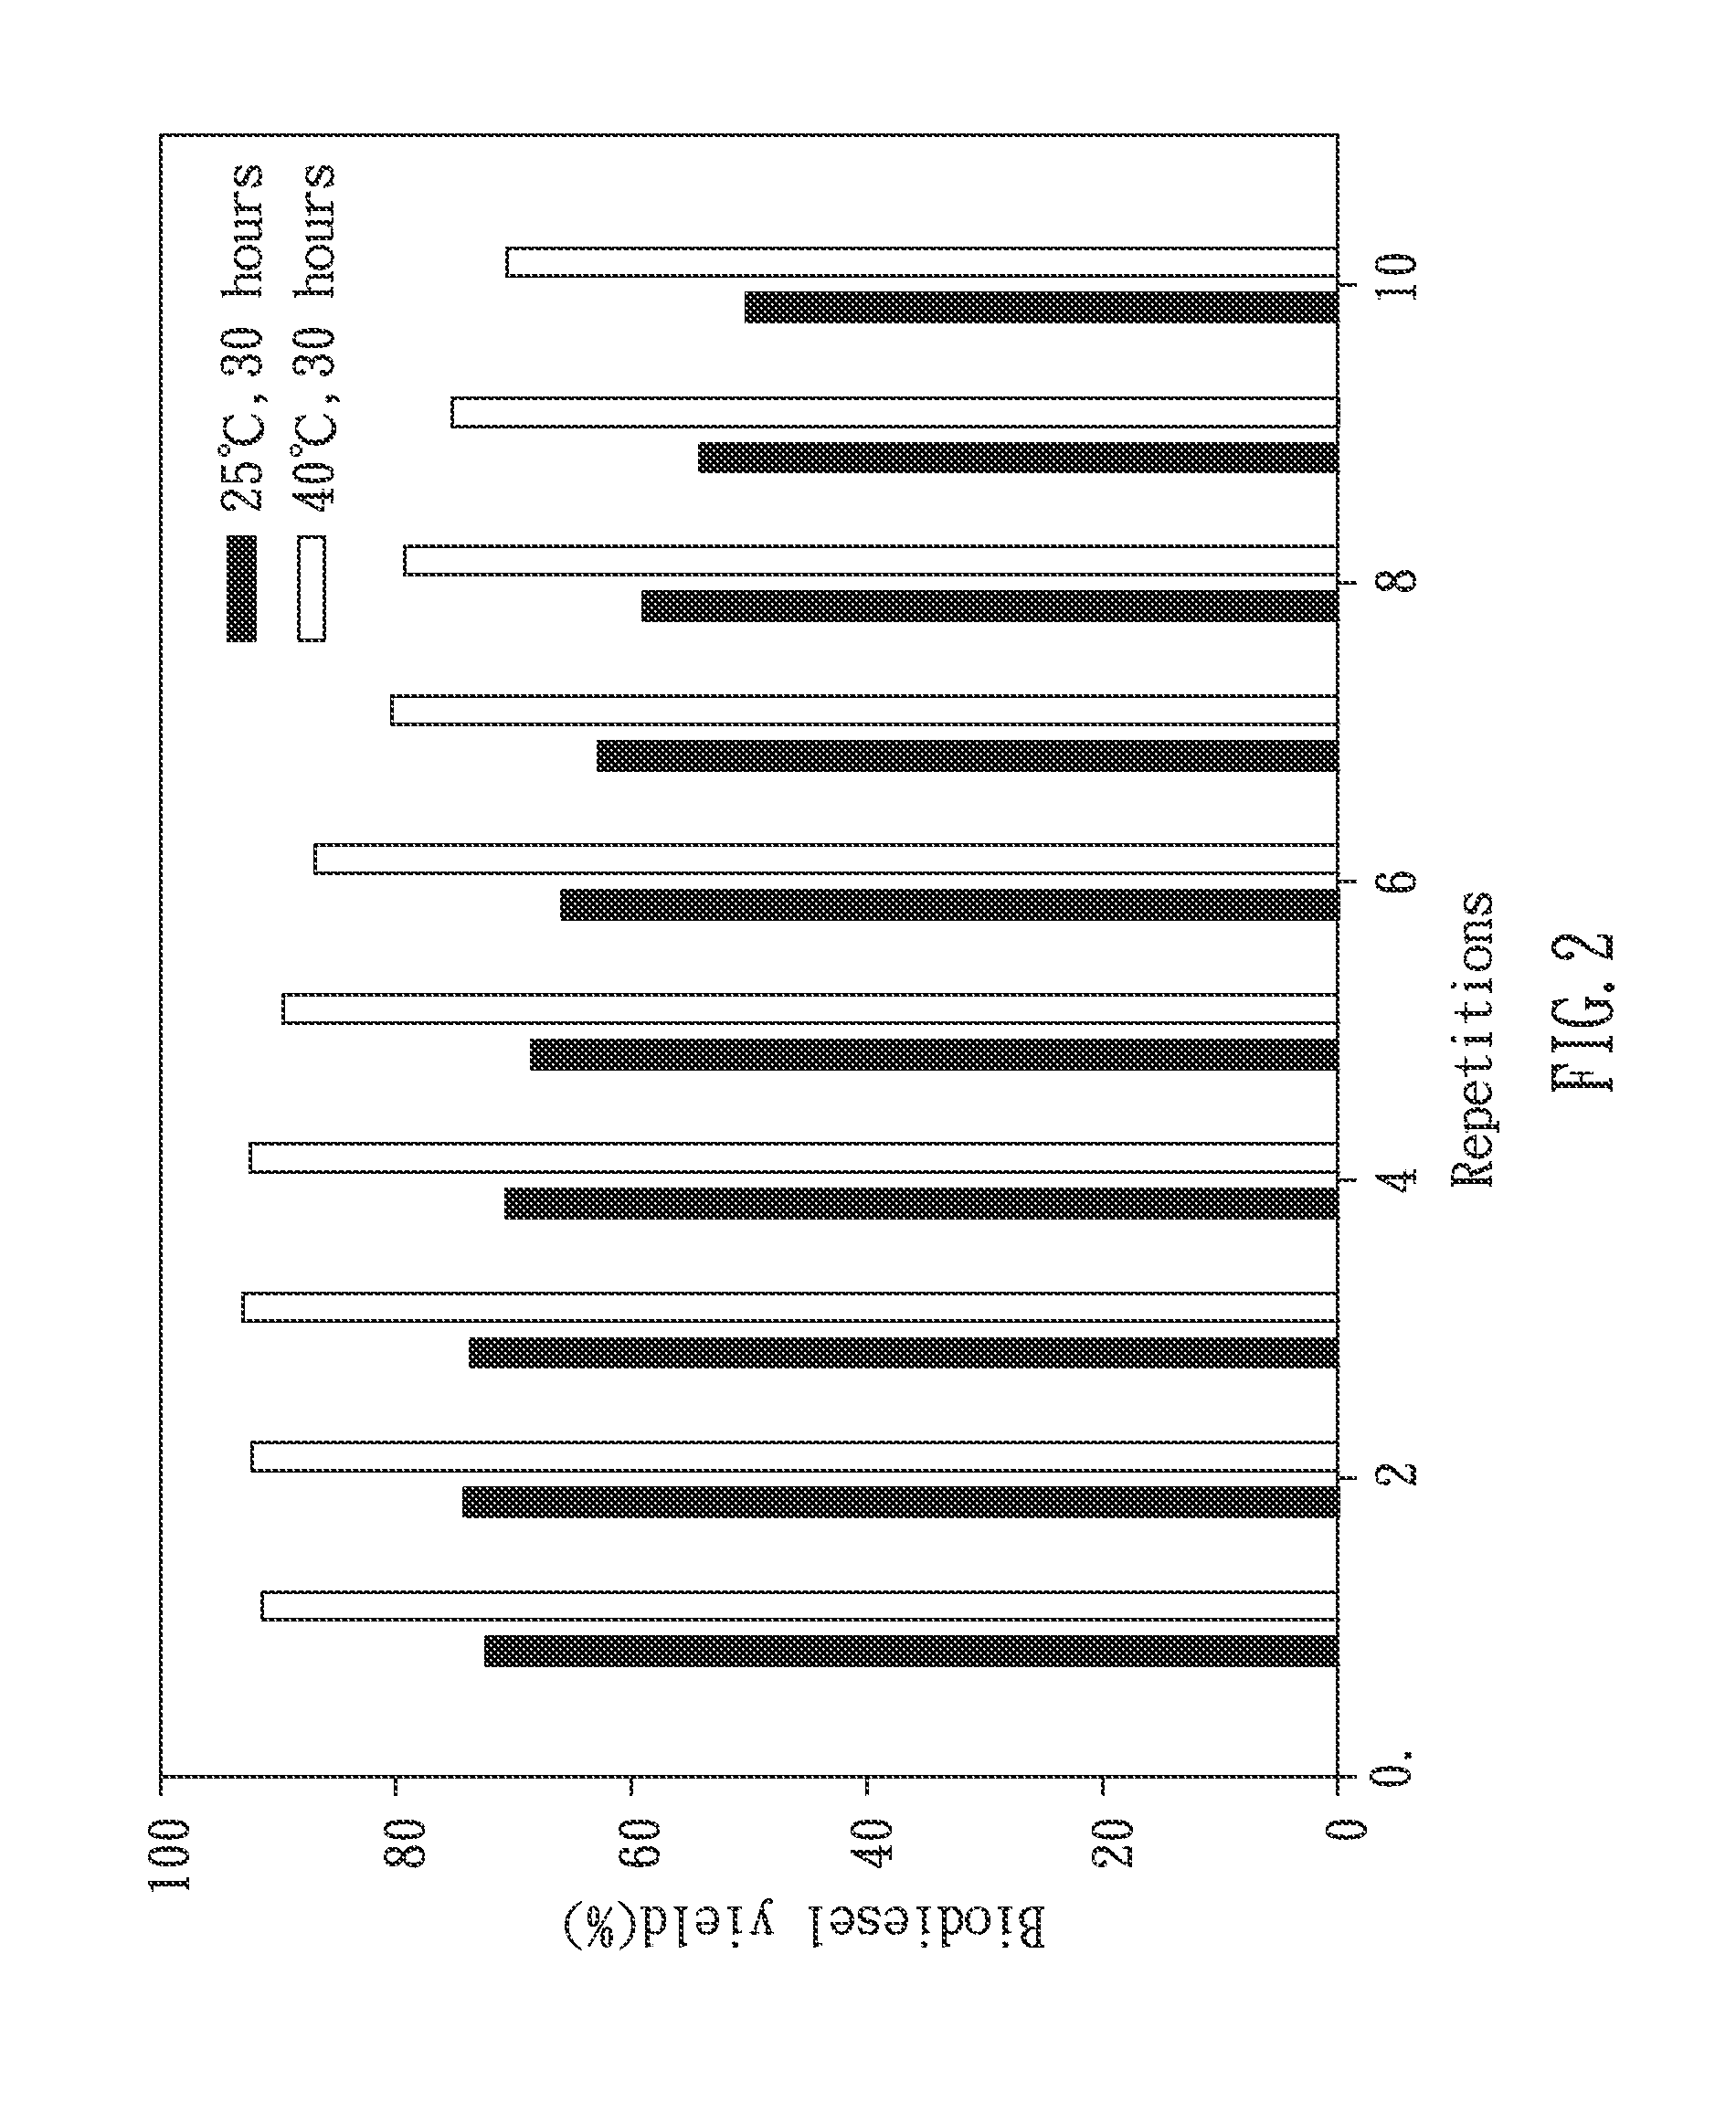 Core-shell magnetic composite and application on producing biodiesel using the same